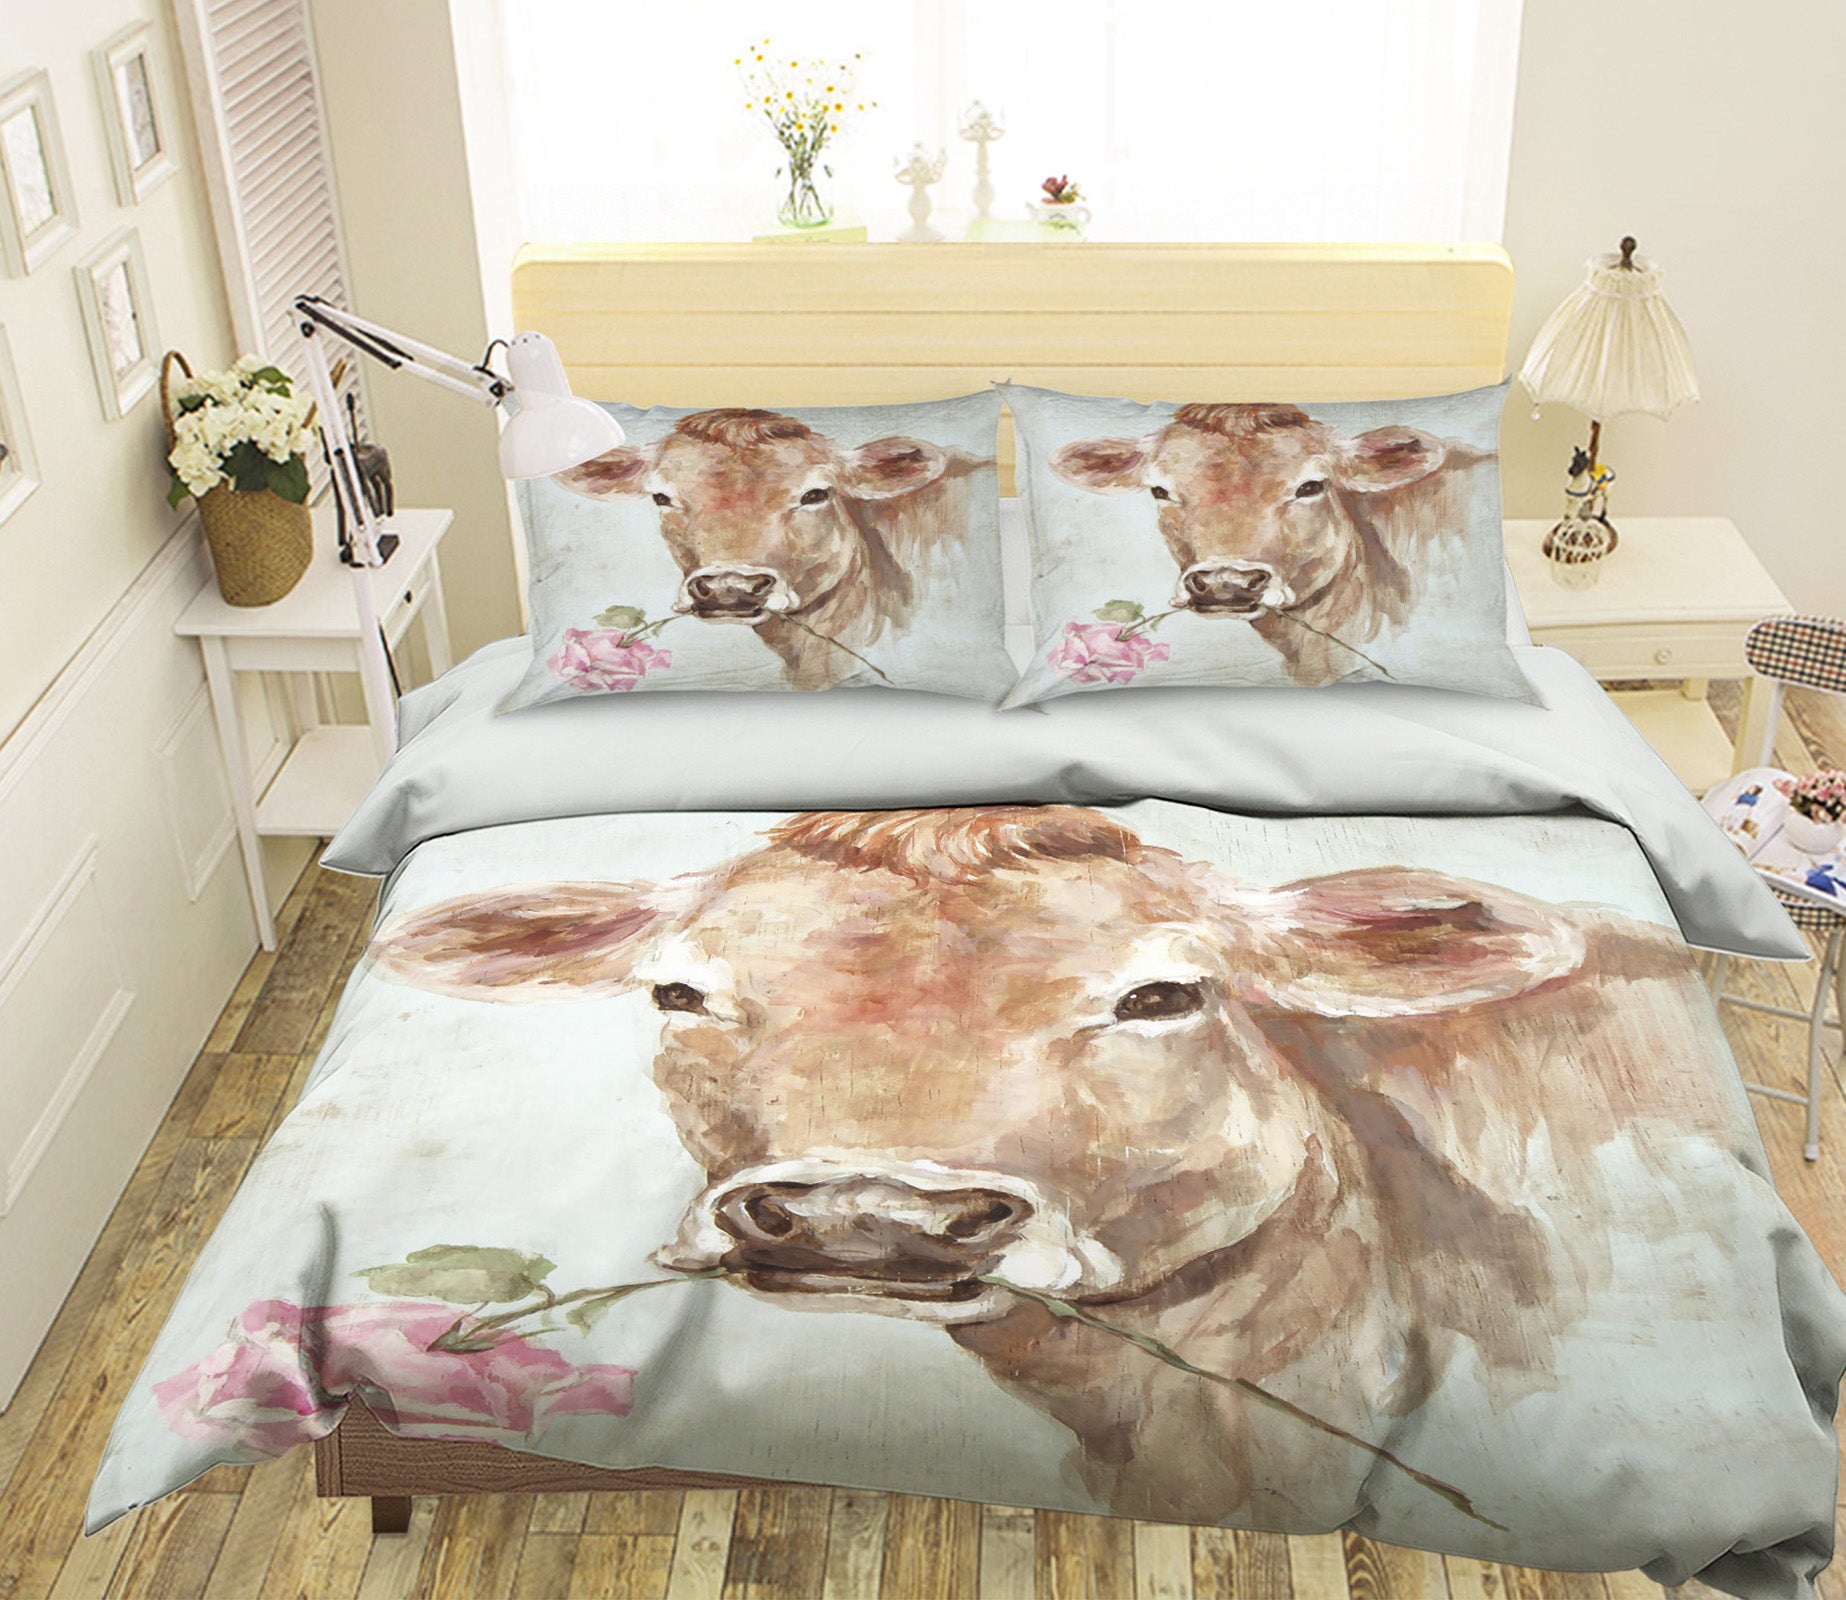 3D Cow Rose 024 Debi Coules Bedding Bed Pillowcases Quilt